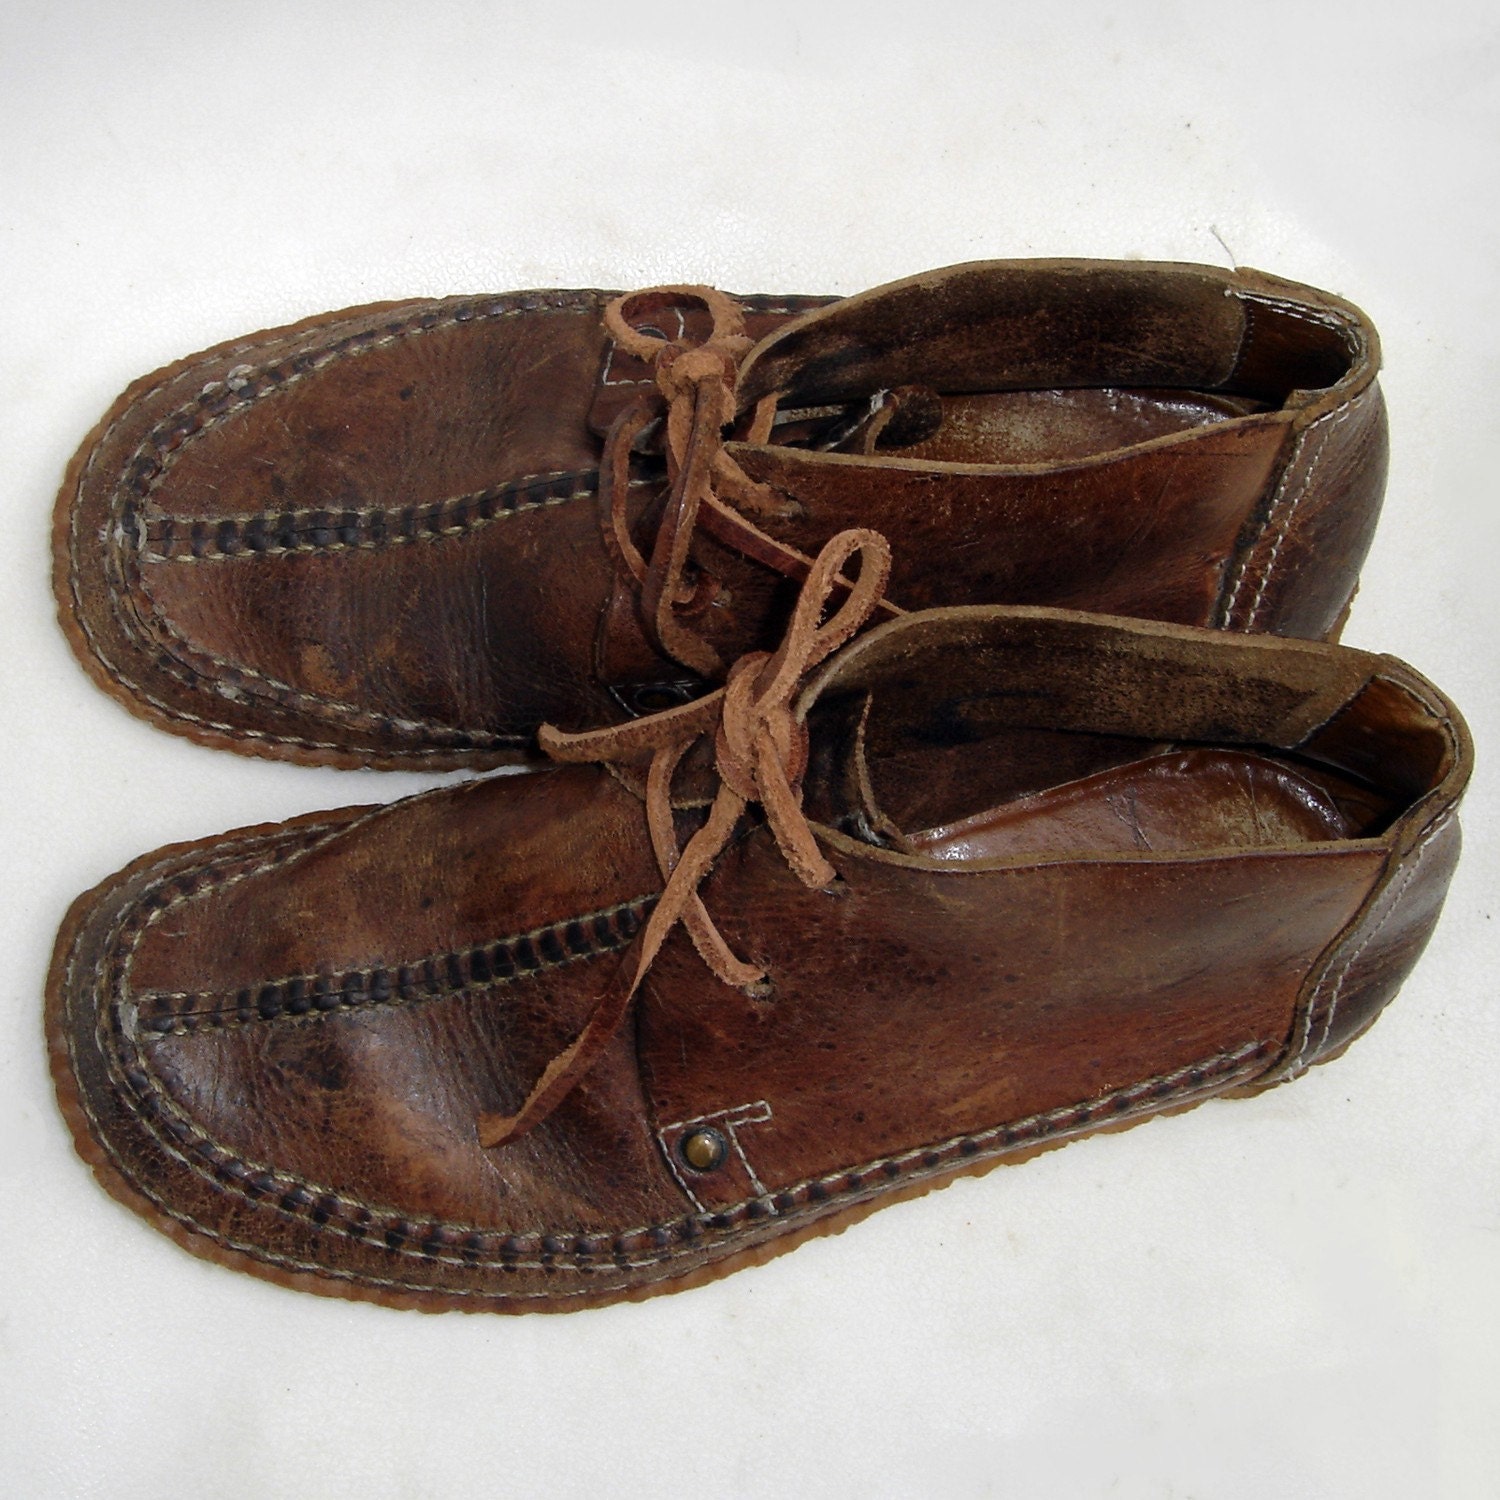 Vintage Comfort Ankle Leather Shoes Men 9 by RockywayVintage